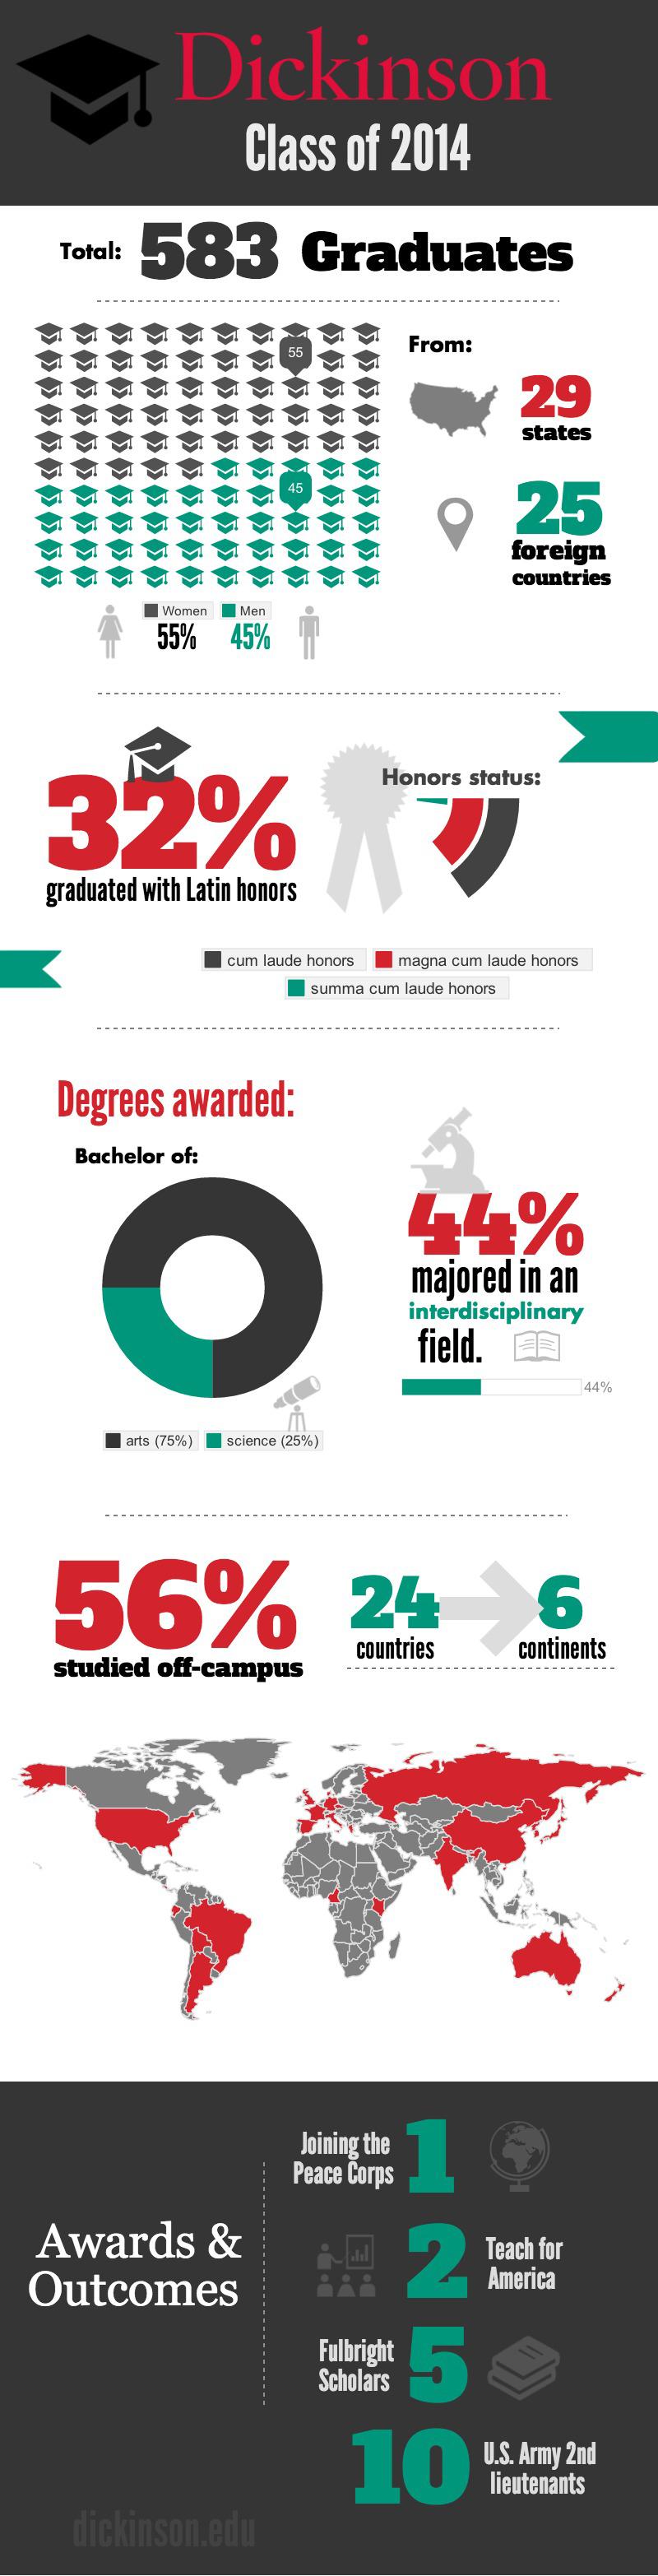 Class of 2014 Infographic